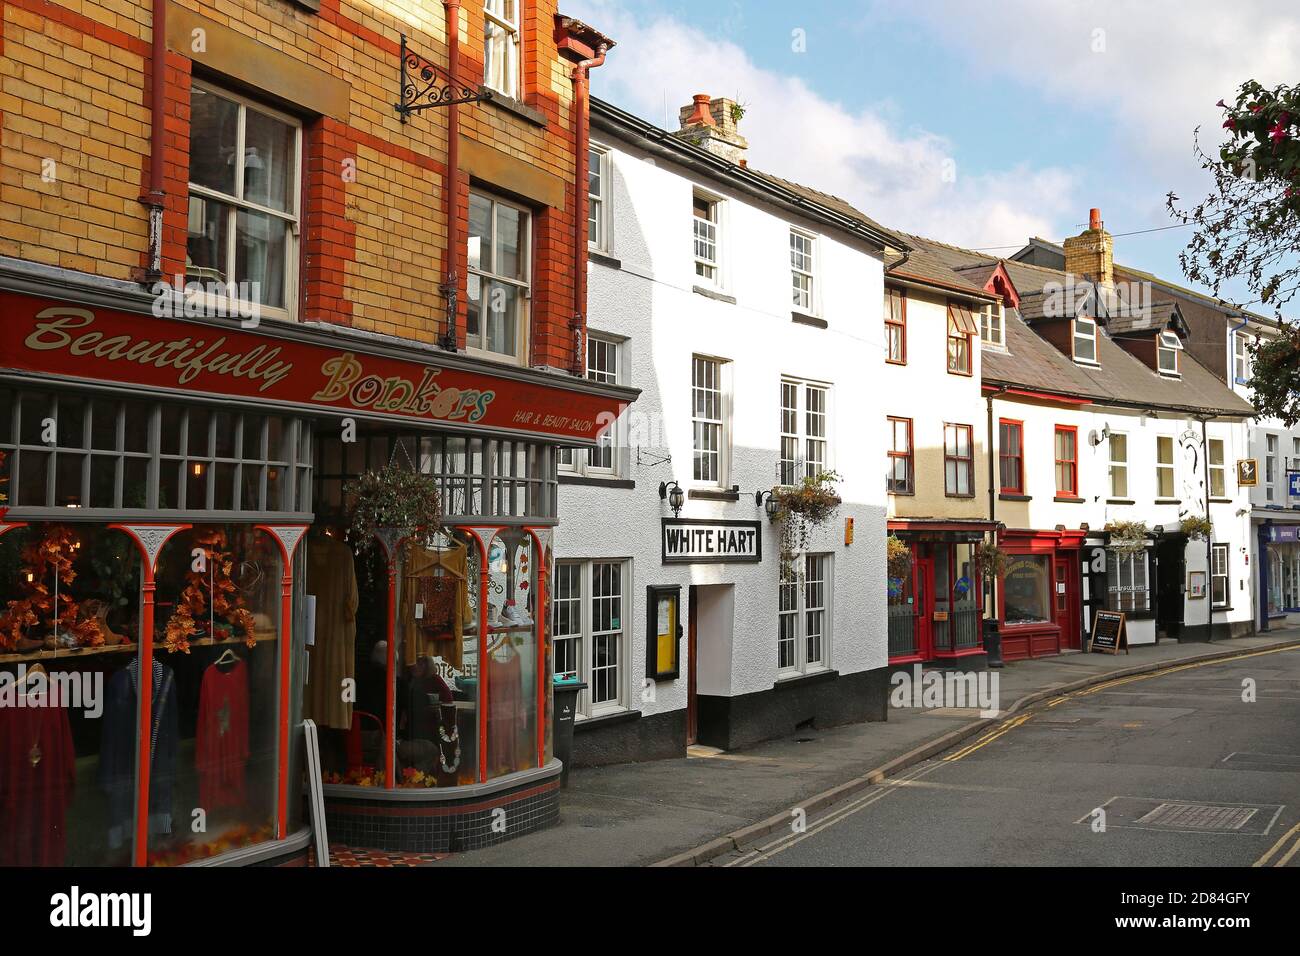 Beautifully Bonkers and White Hart, High Street, Builth Wells, Brecknockshire, Powys, Wales, Great Britain, United Kingdom, UK, Europe Stock Photo